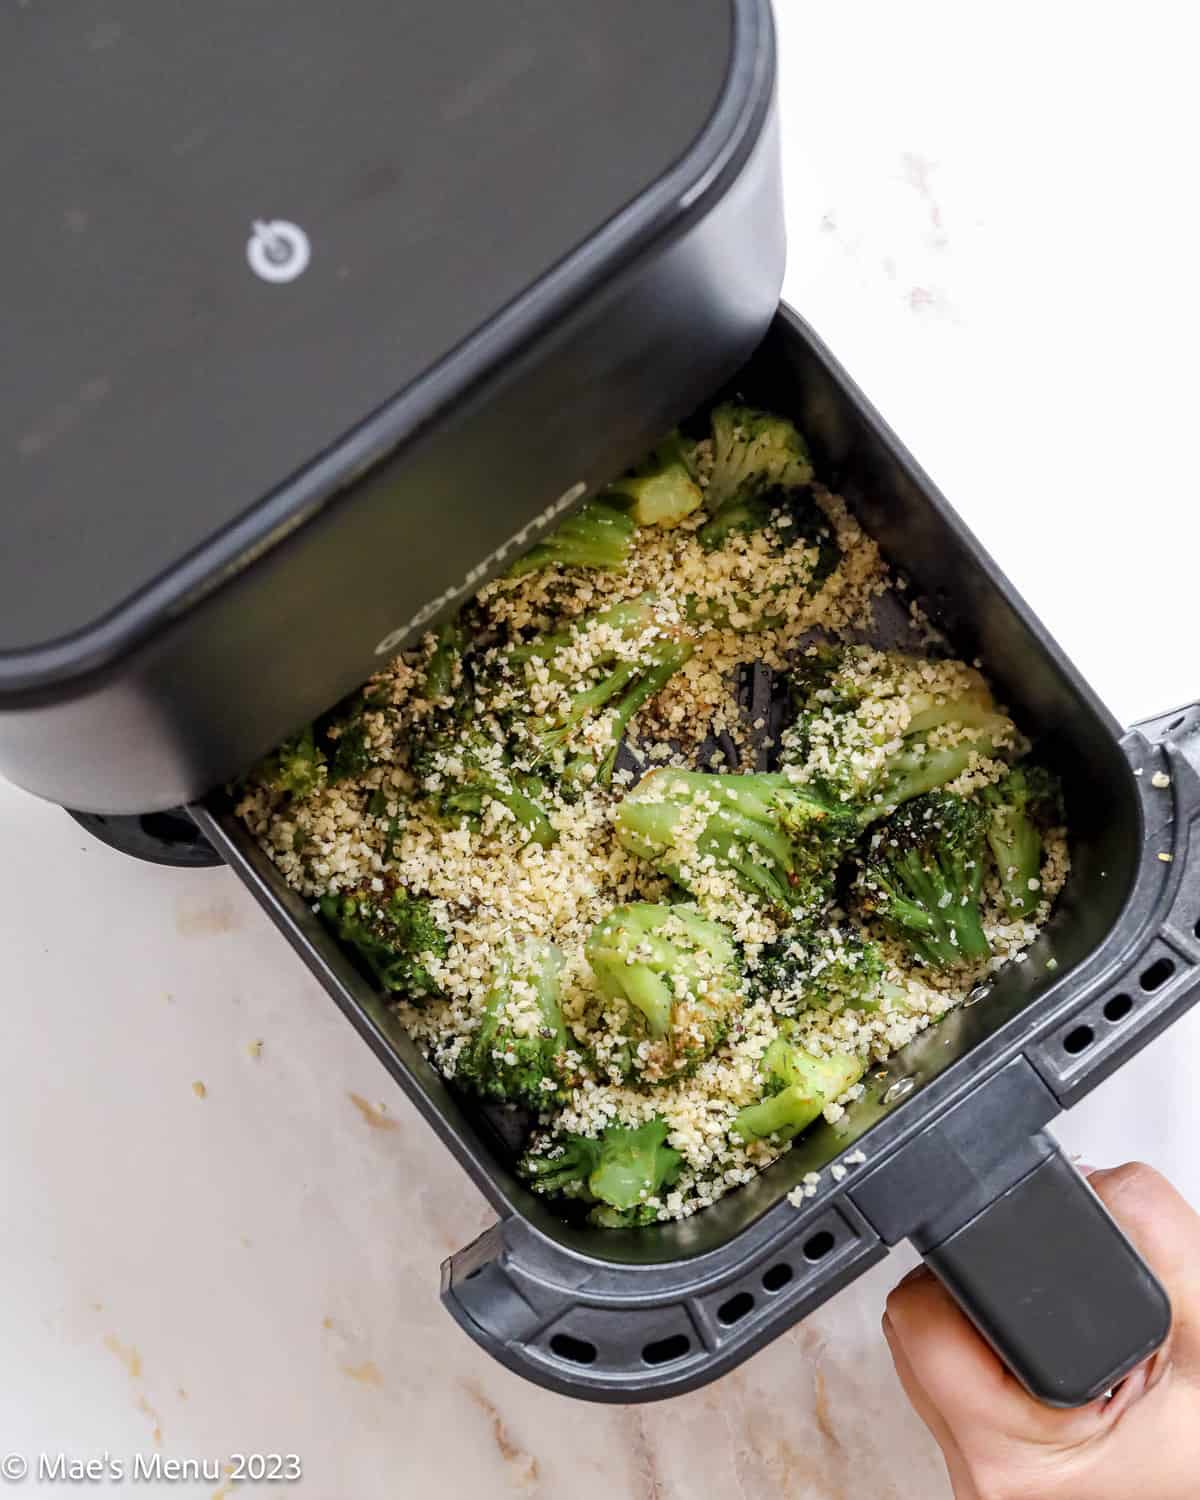 Putting the broccoli with breadcrumbs back in to air fry.